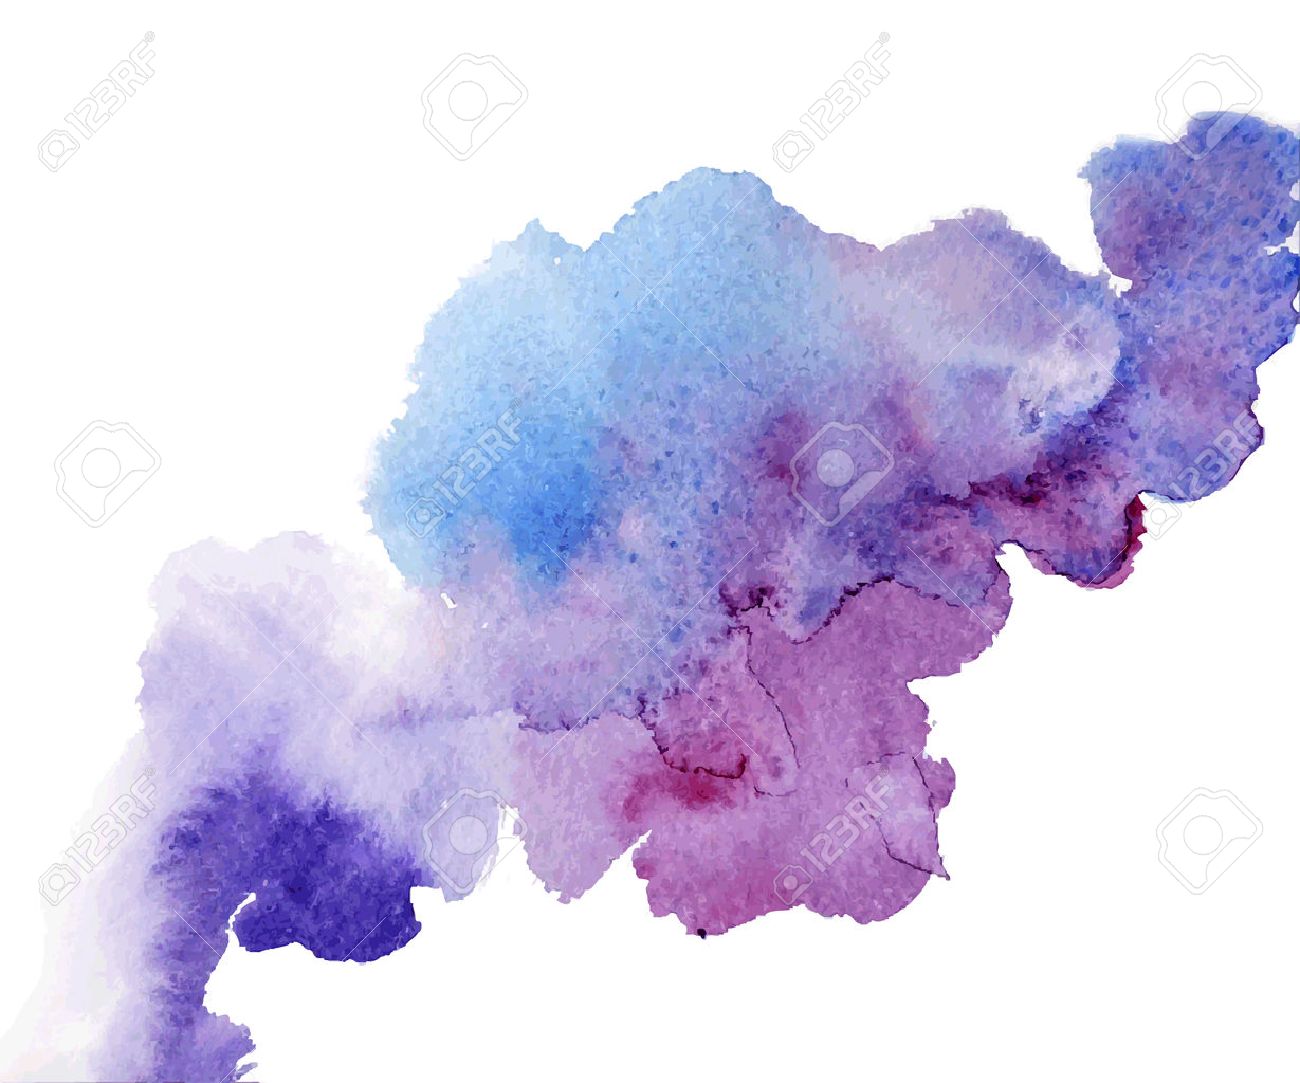 13820 Watercolor free clipart.